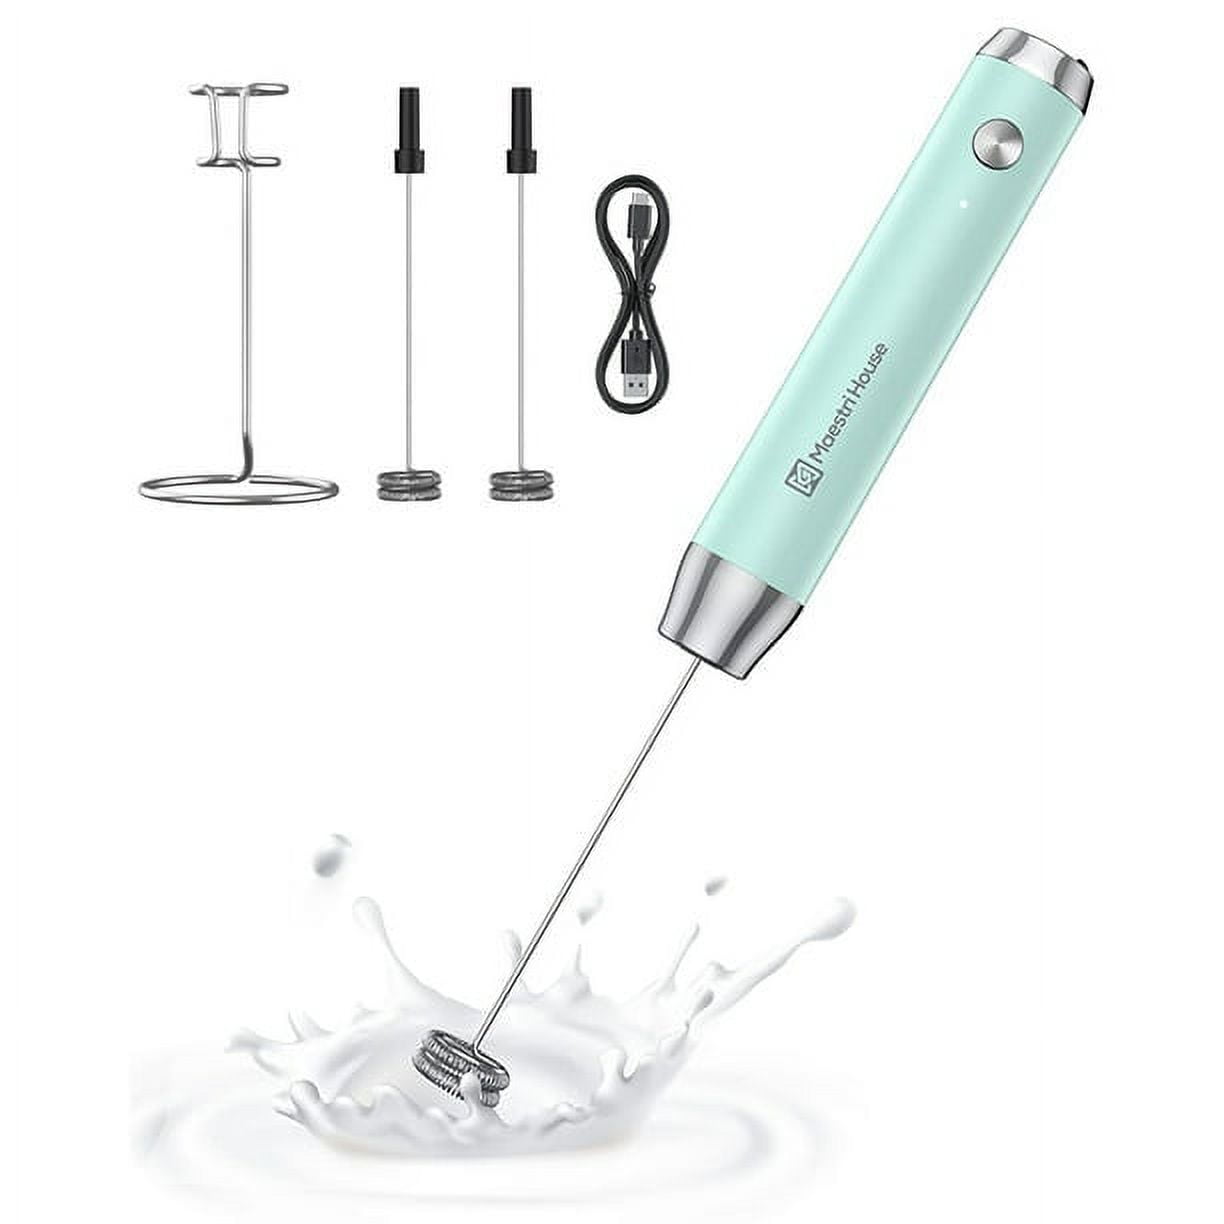 Powerful Handheld Milk Frother - With Stand – Cast Iron Co.